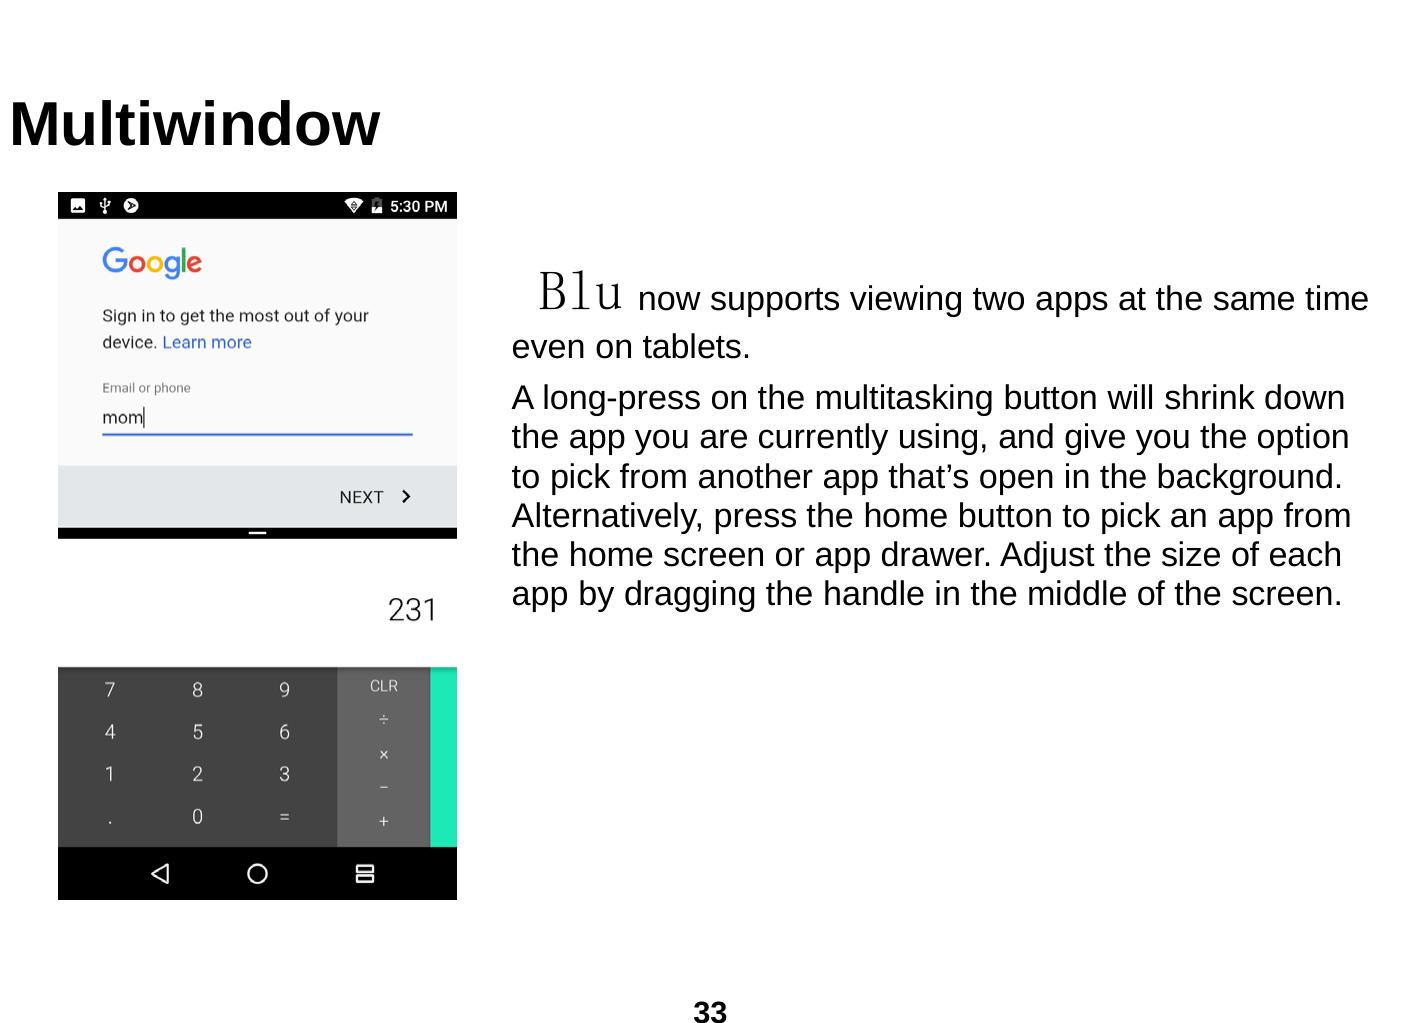  33  Multiwindow   Blu now supports viewing two apps at the same time even on tablets. A long-press on the multitasking button will shrink down the app you are currently using, and give you the option to pick from another app that’s open in the background. Alternatively, press the home button to pick an app from the home screen or app drawer. Adjust the size of each app by dragging the handle in the middle of the screen.                     